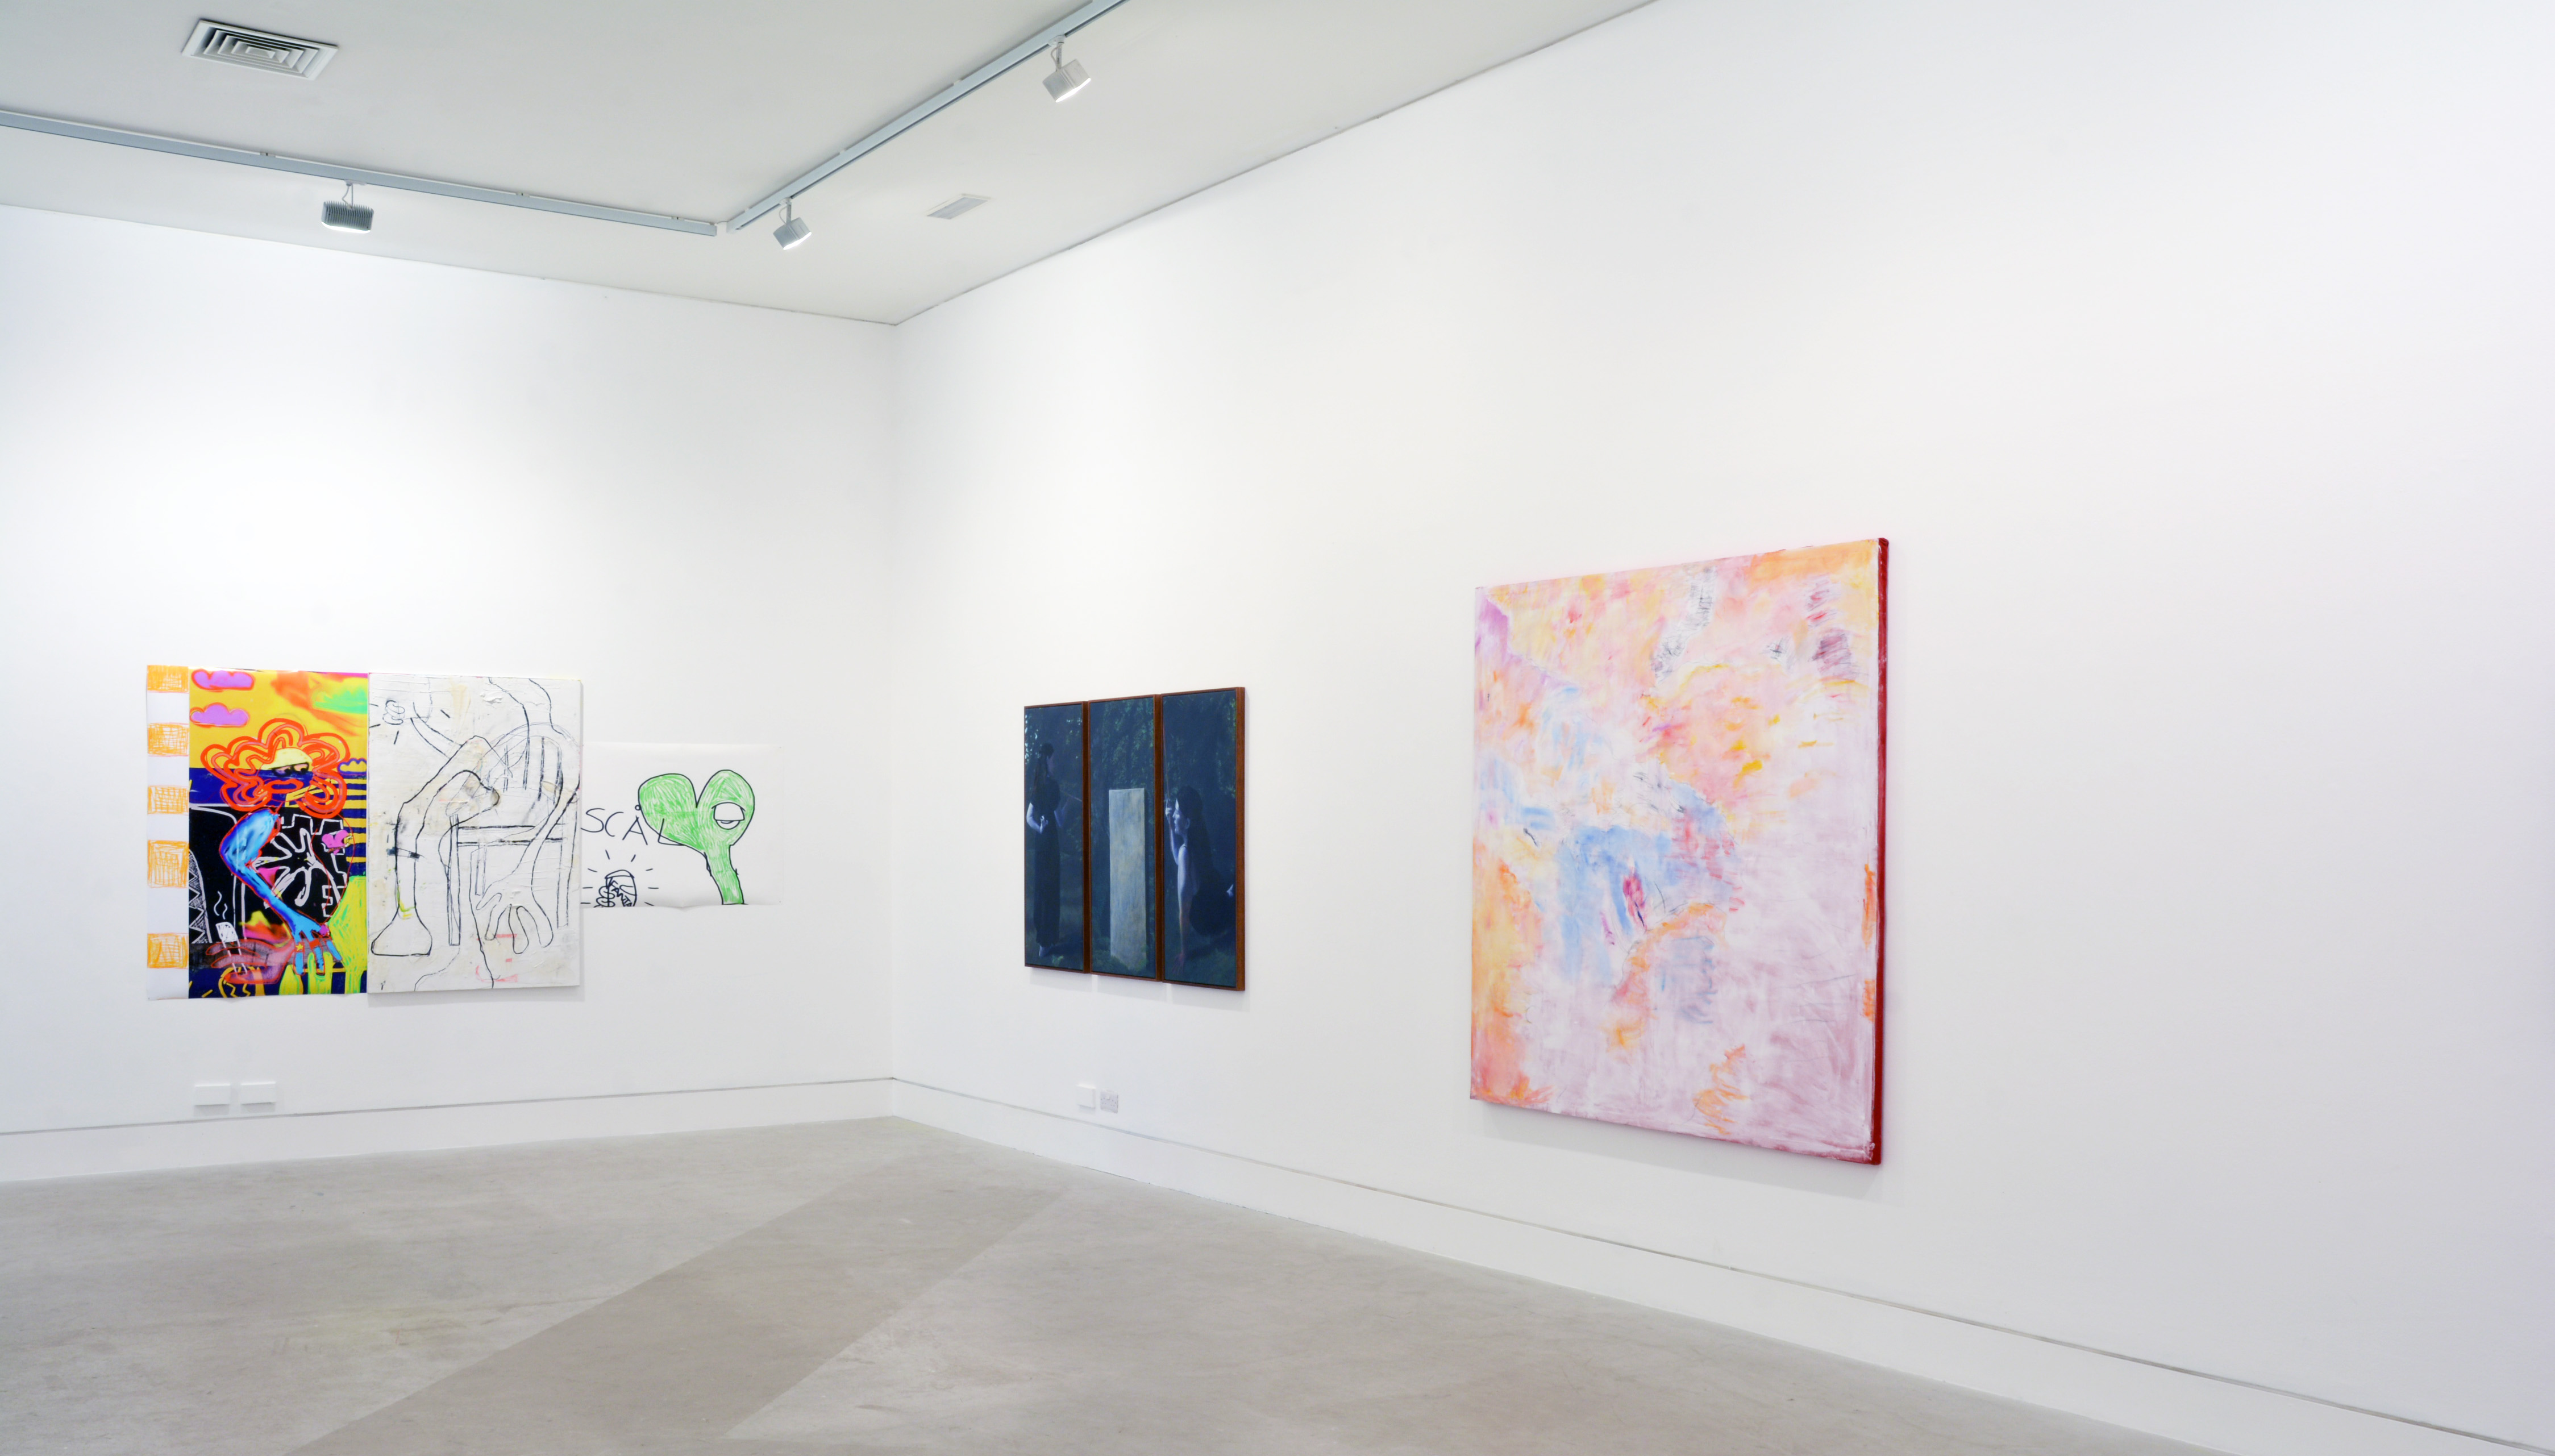 A selection of paintings hanging in a white walled gallery space.